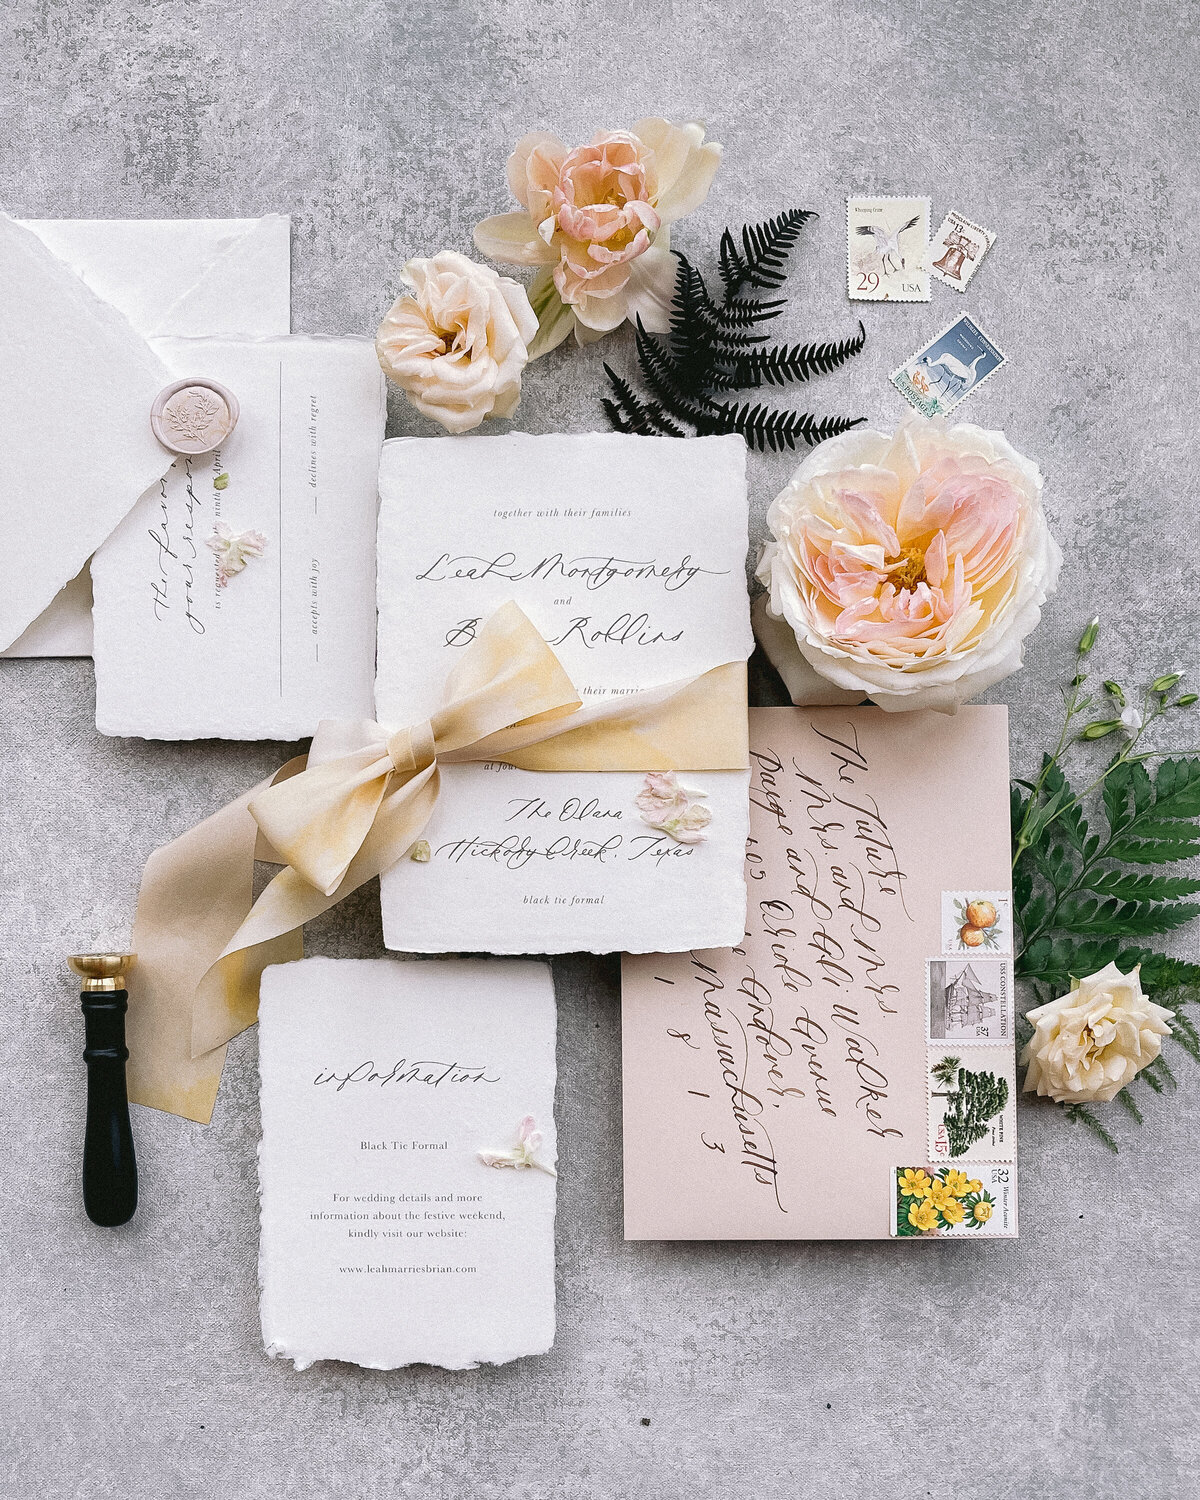 Handmade paper wedding invitation suite styled with romantic florals and handwritten calligraphy.